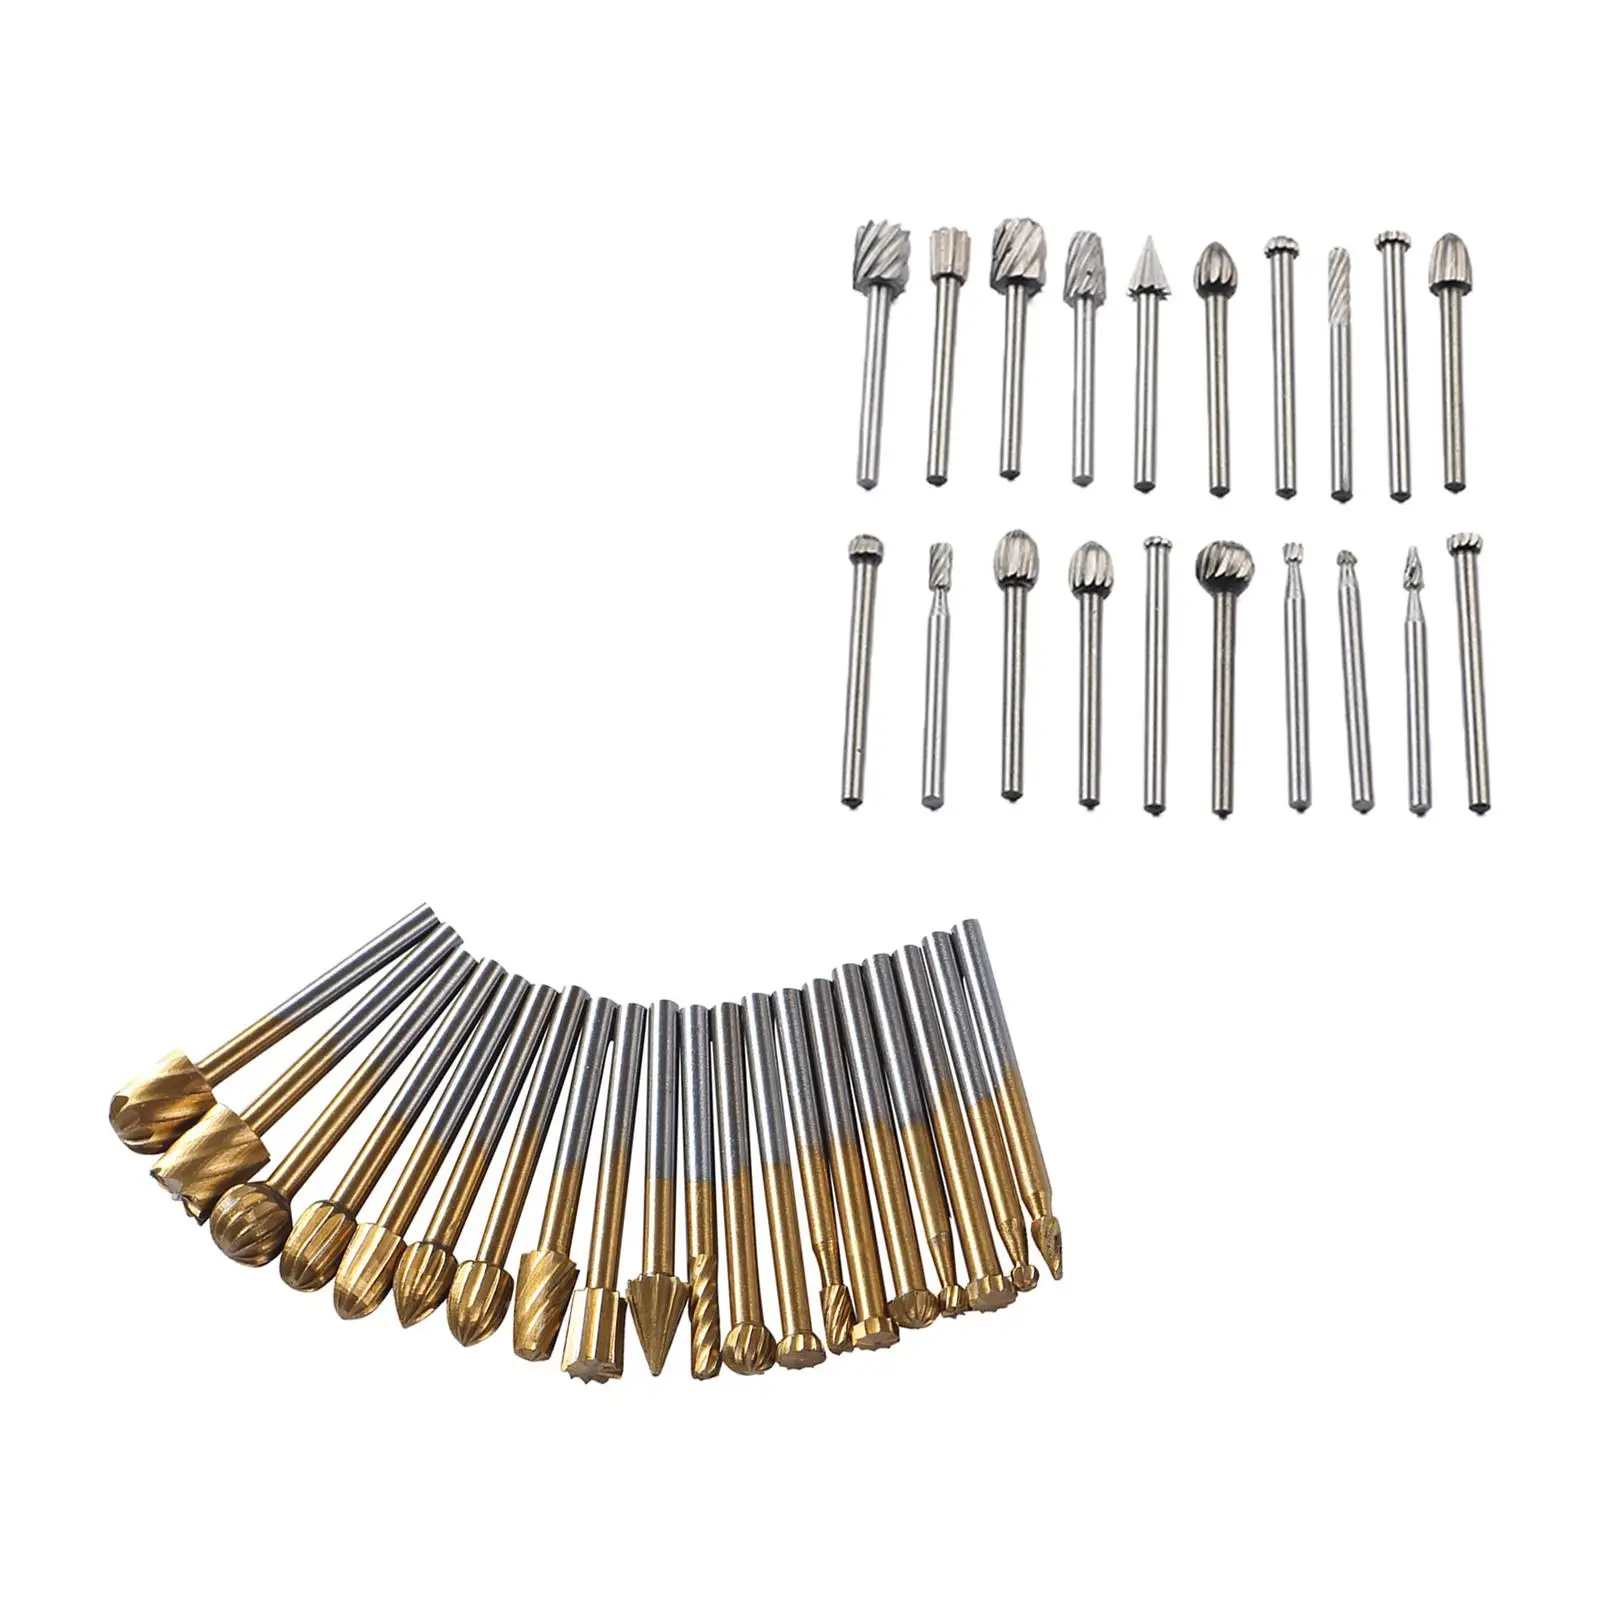 20Pcs Rotary Drill Set, Engraving Bits Metal Grinding Cutting Burr Bit for DIY Woodworking